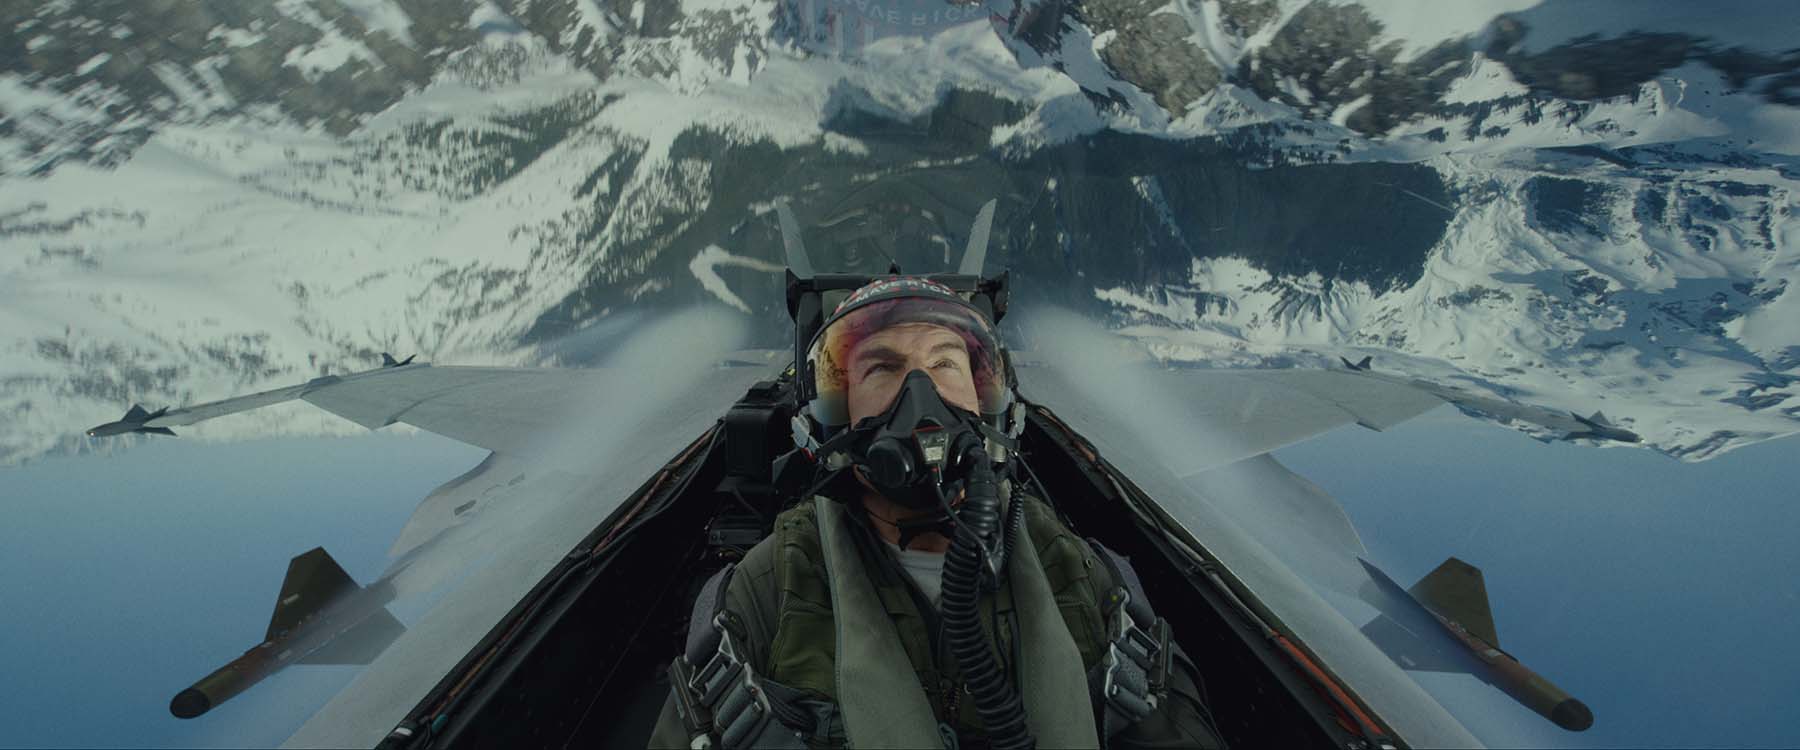 Tom Cruise in cockpit of plane with sky behind him 